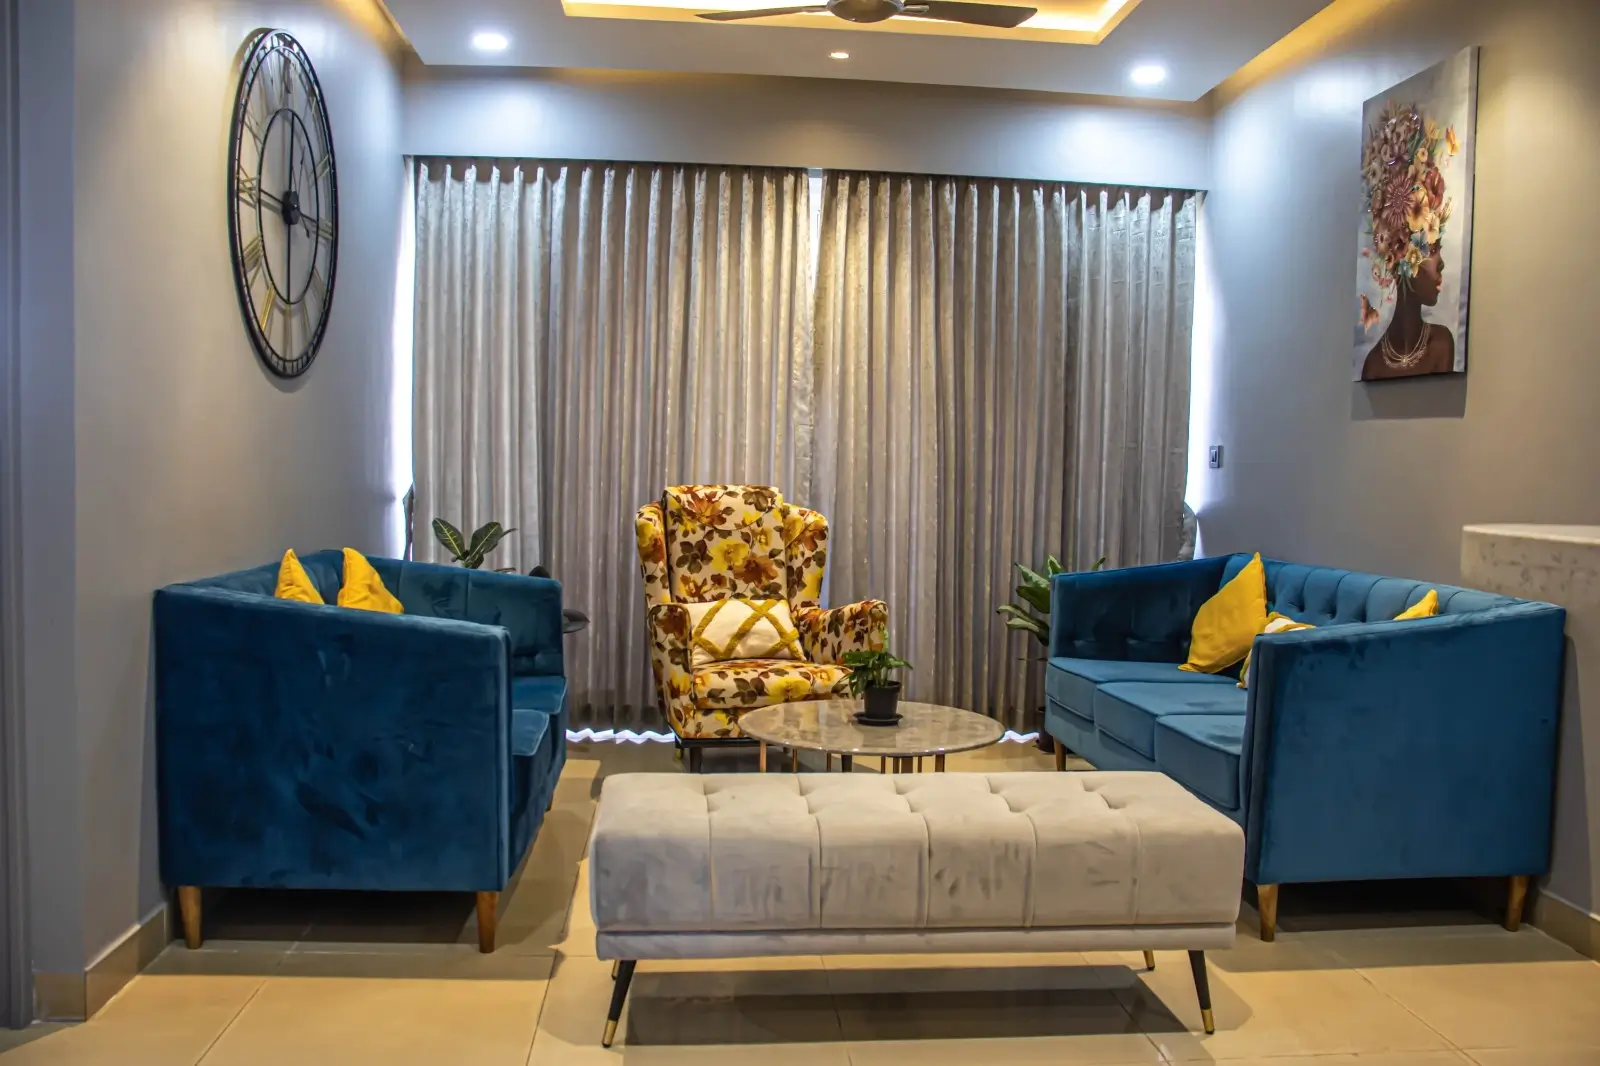 Why Choosing an Interior Designer for Home is Essential in Bangalore?